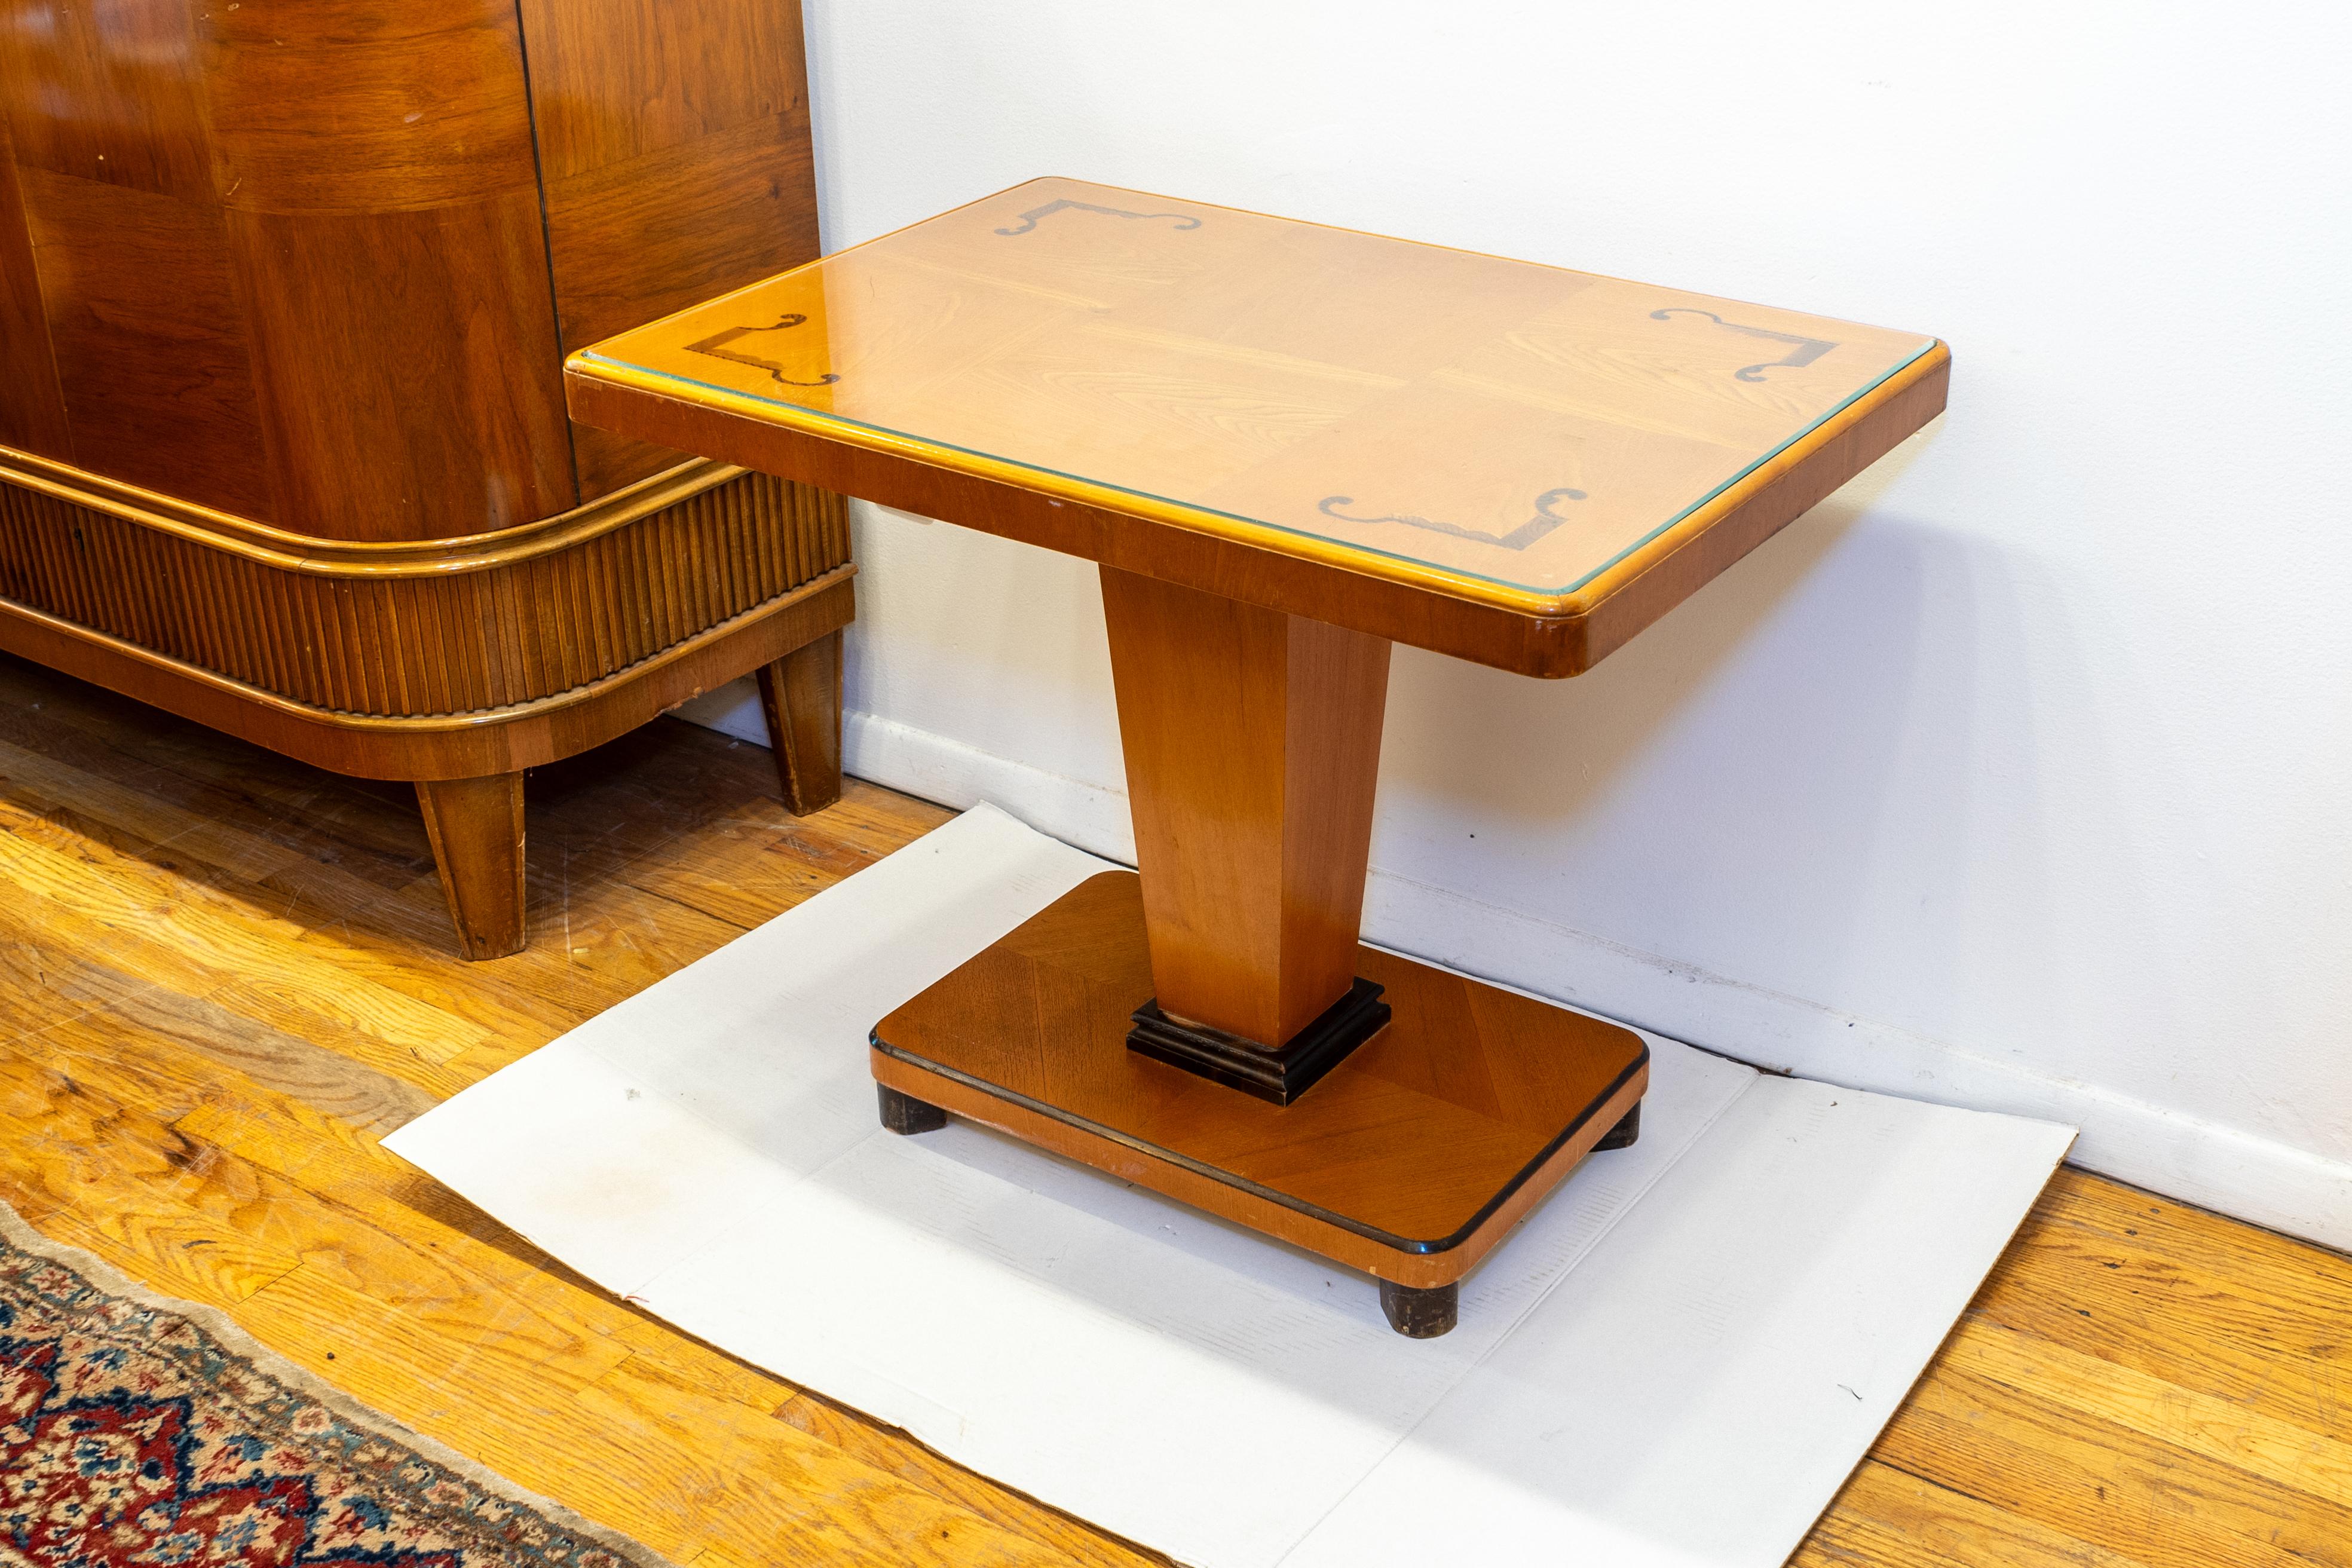 A pedestal style coffee table constructed of solid Swedish Ash, and veneered in bookmatched Ash face sections. It is inlaid with a stylized Art Deco motif in Walnut. The feet and elements of the base are stained and lacquered a Walnut tone as well. 
